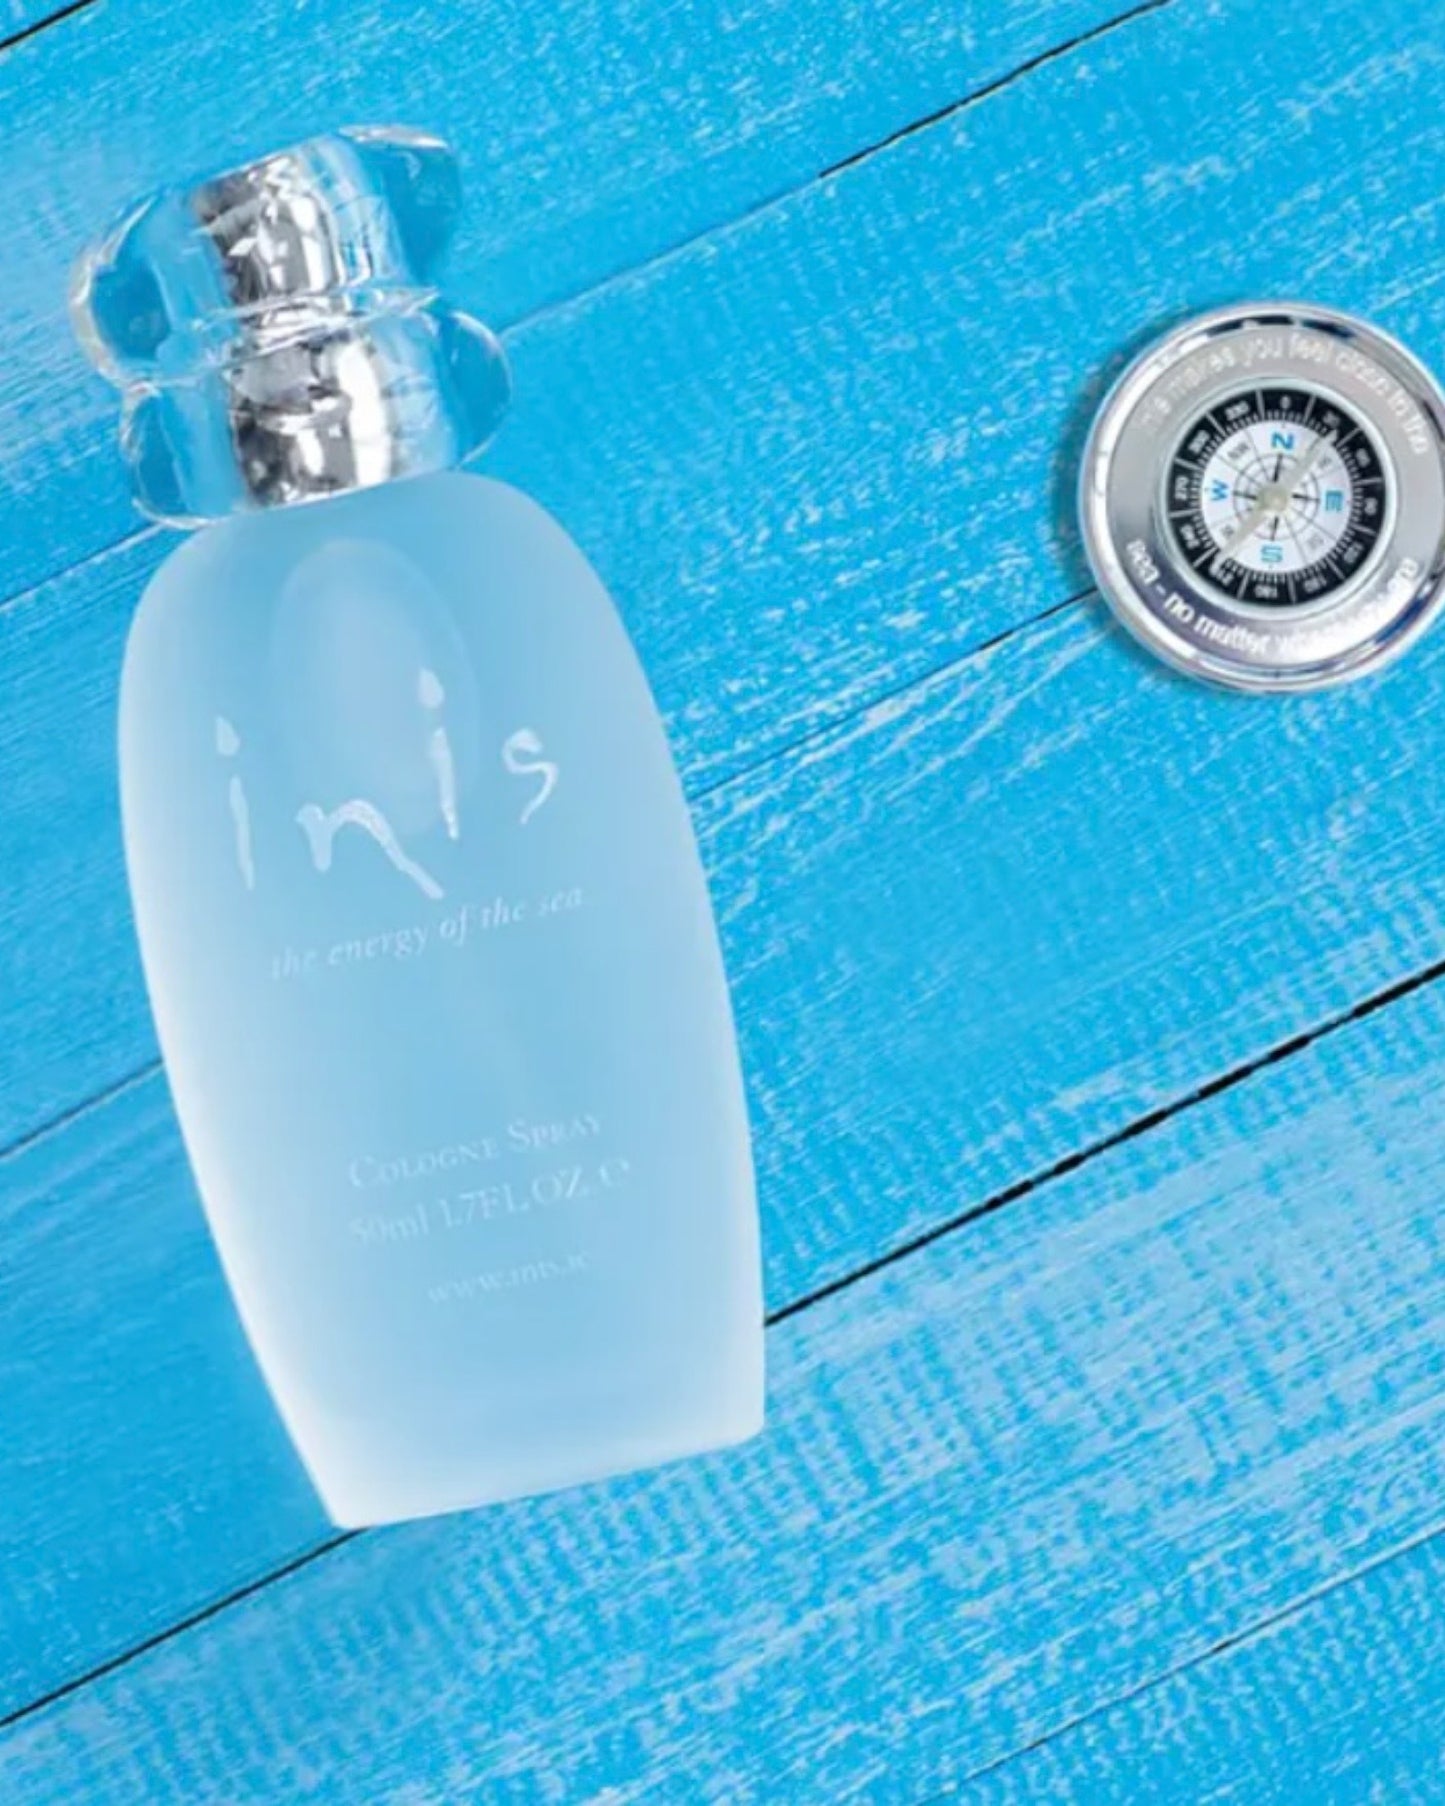 Inis Fragrance of Ireland Cologne Spray